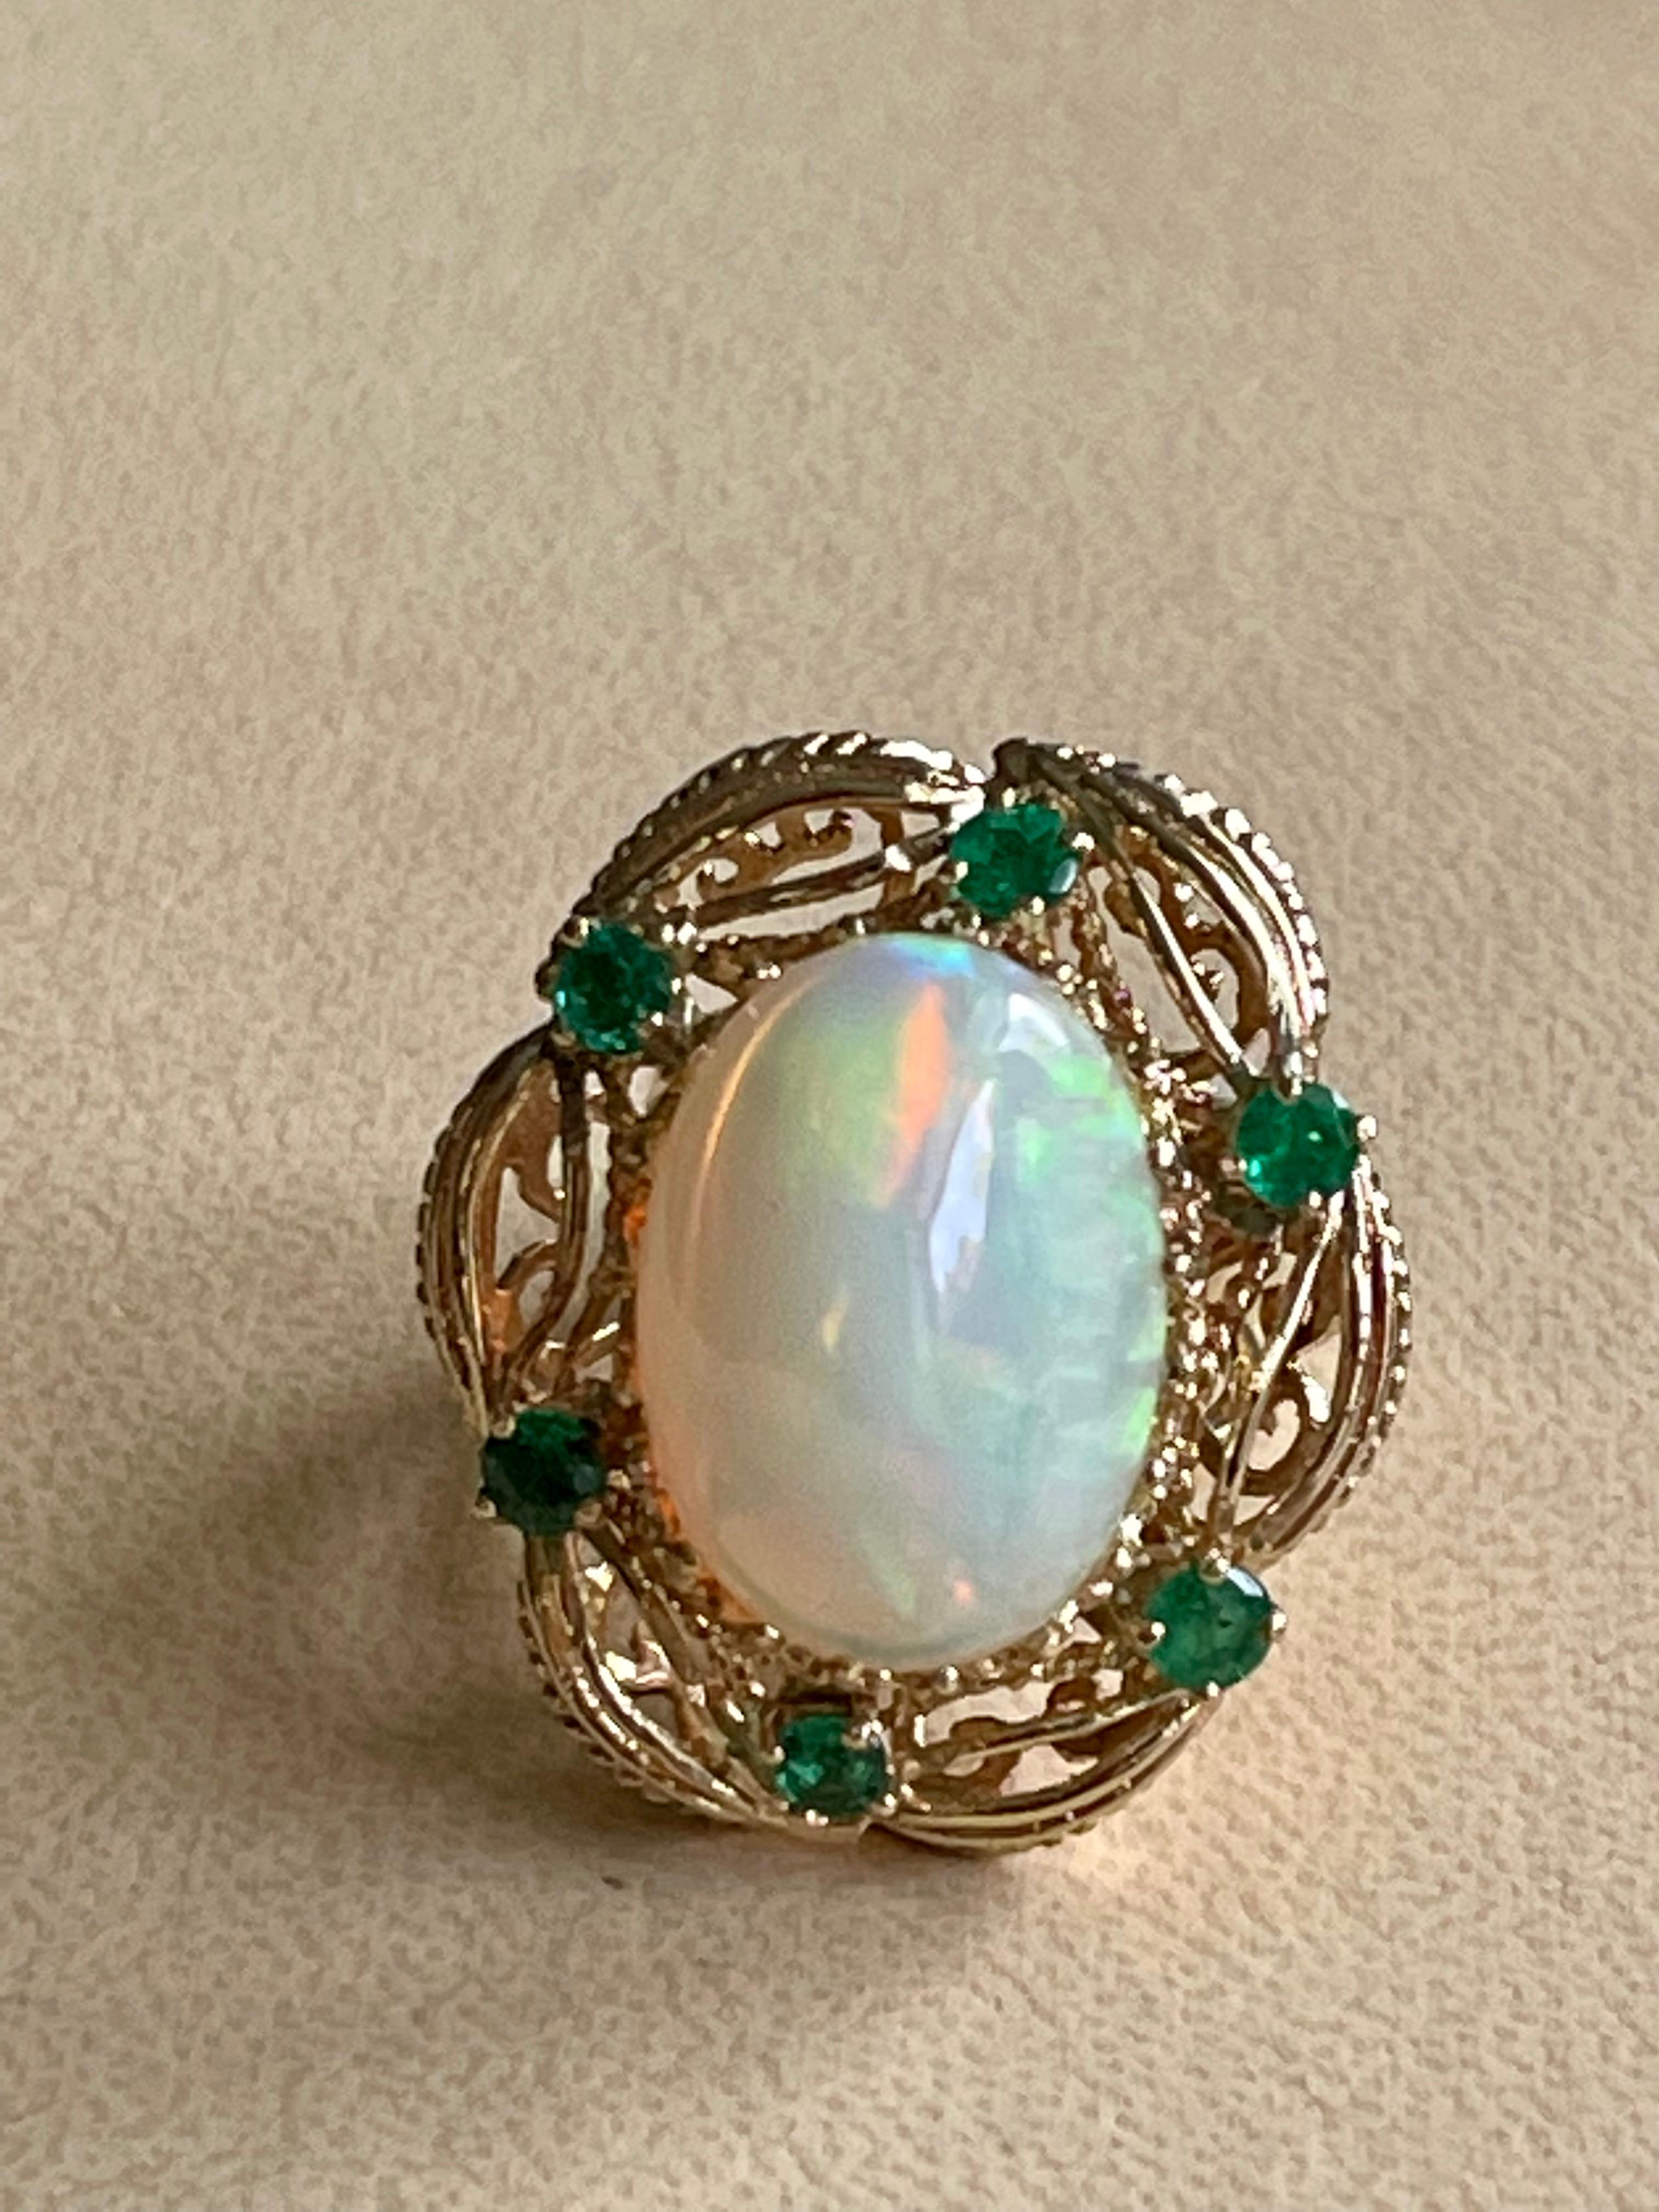 15 Carat Oval Shape Ethiopian Opal Cocktail Ring 14 Karat Yellow Gold Solid Ring For Sale 1